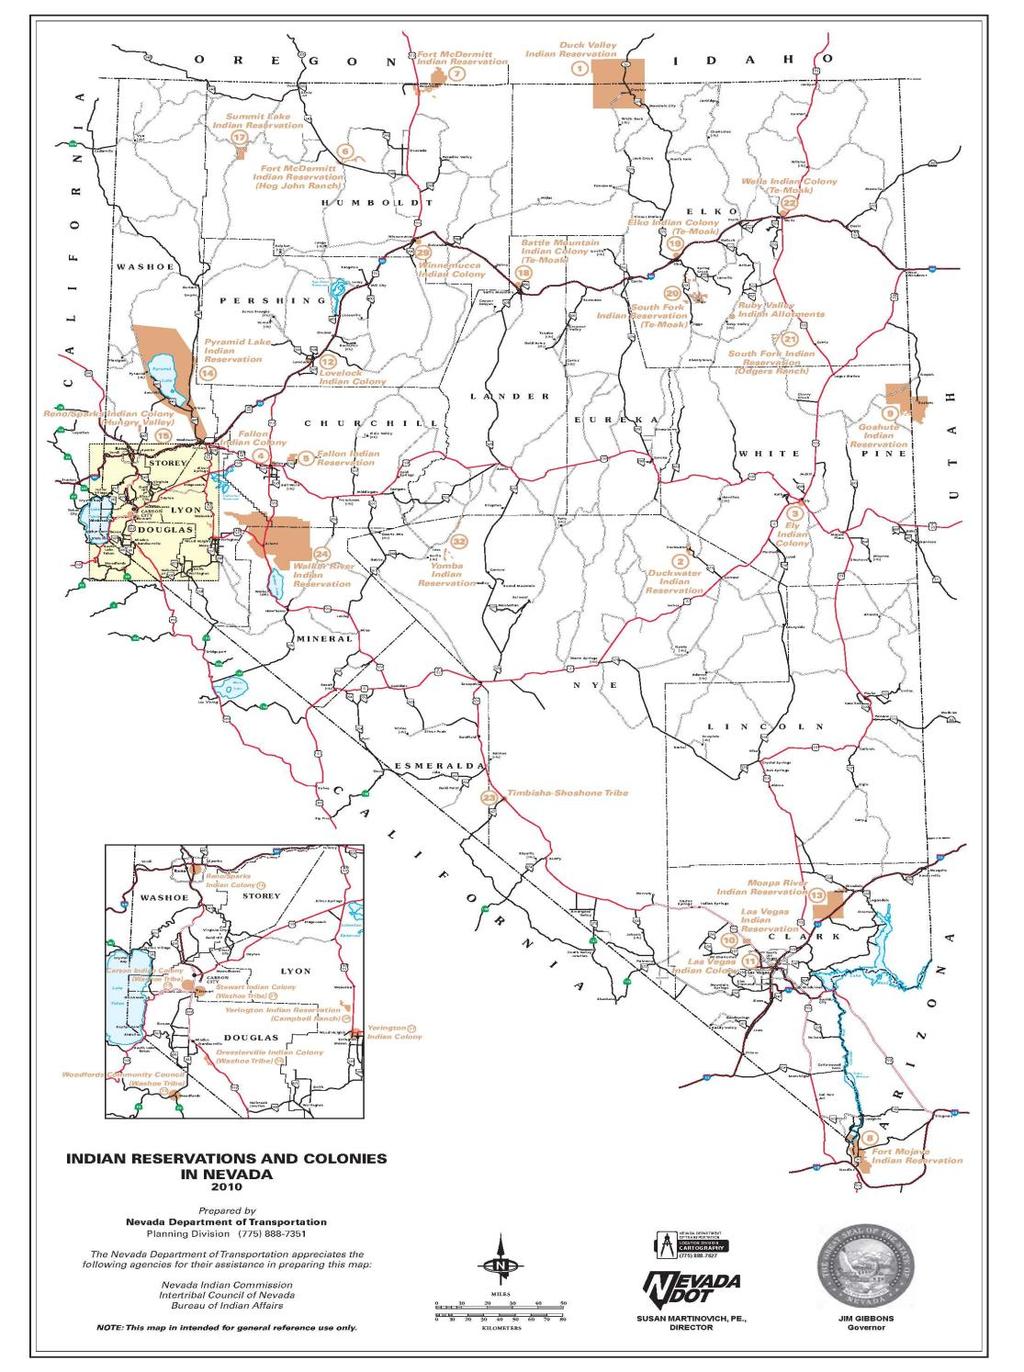 Figure 0-5 below shows the location of Indian reservations and colonies in Nevada and contact information for each